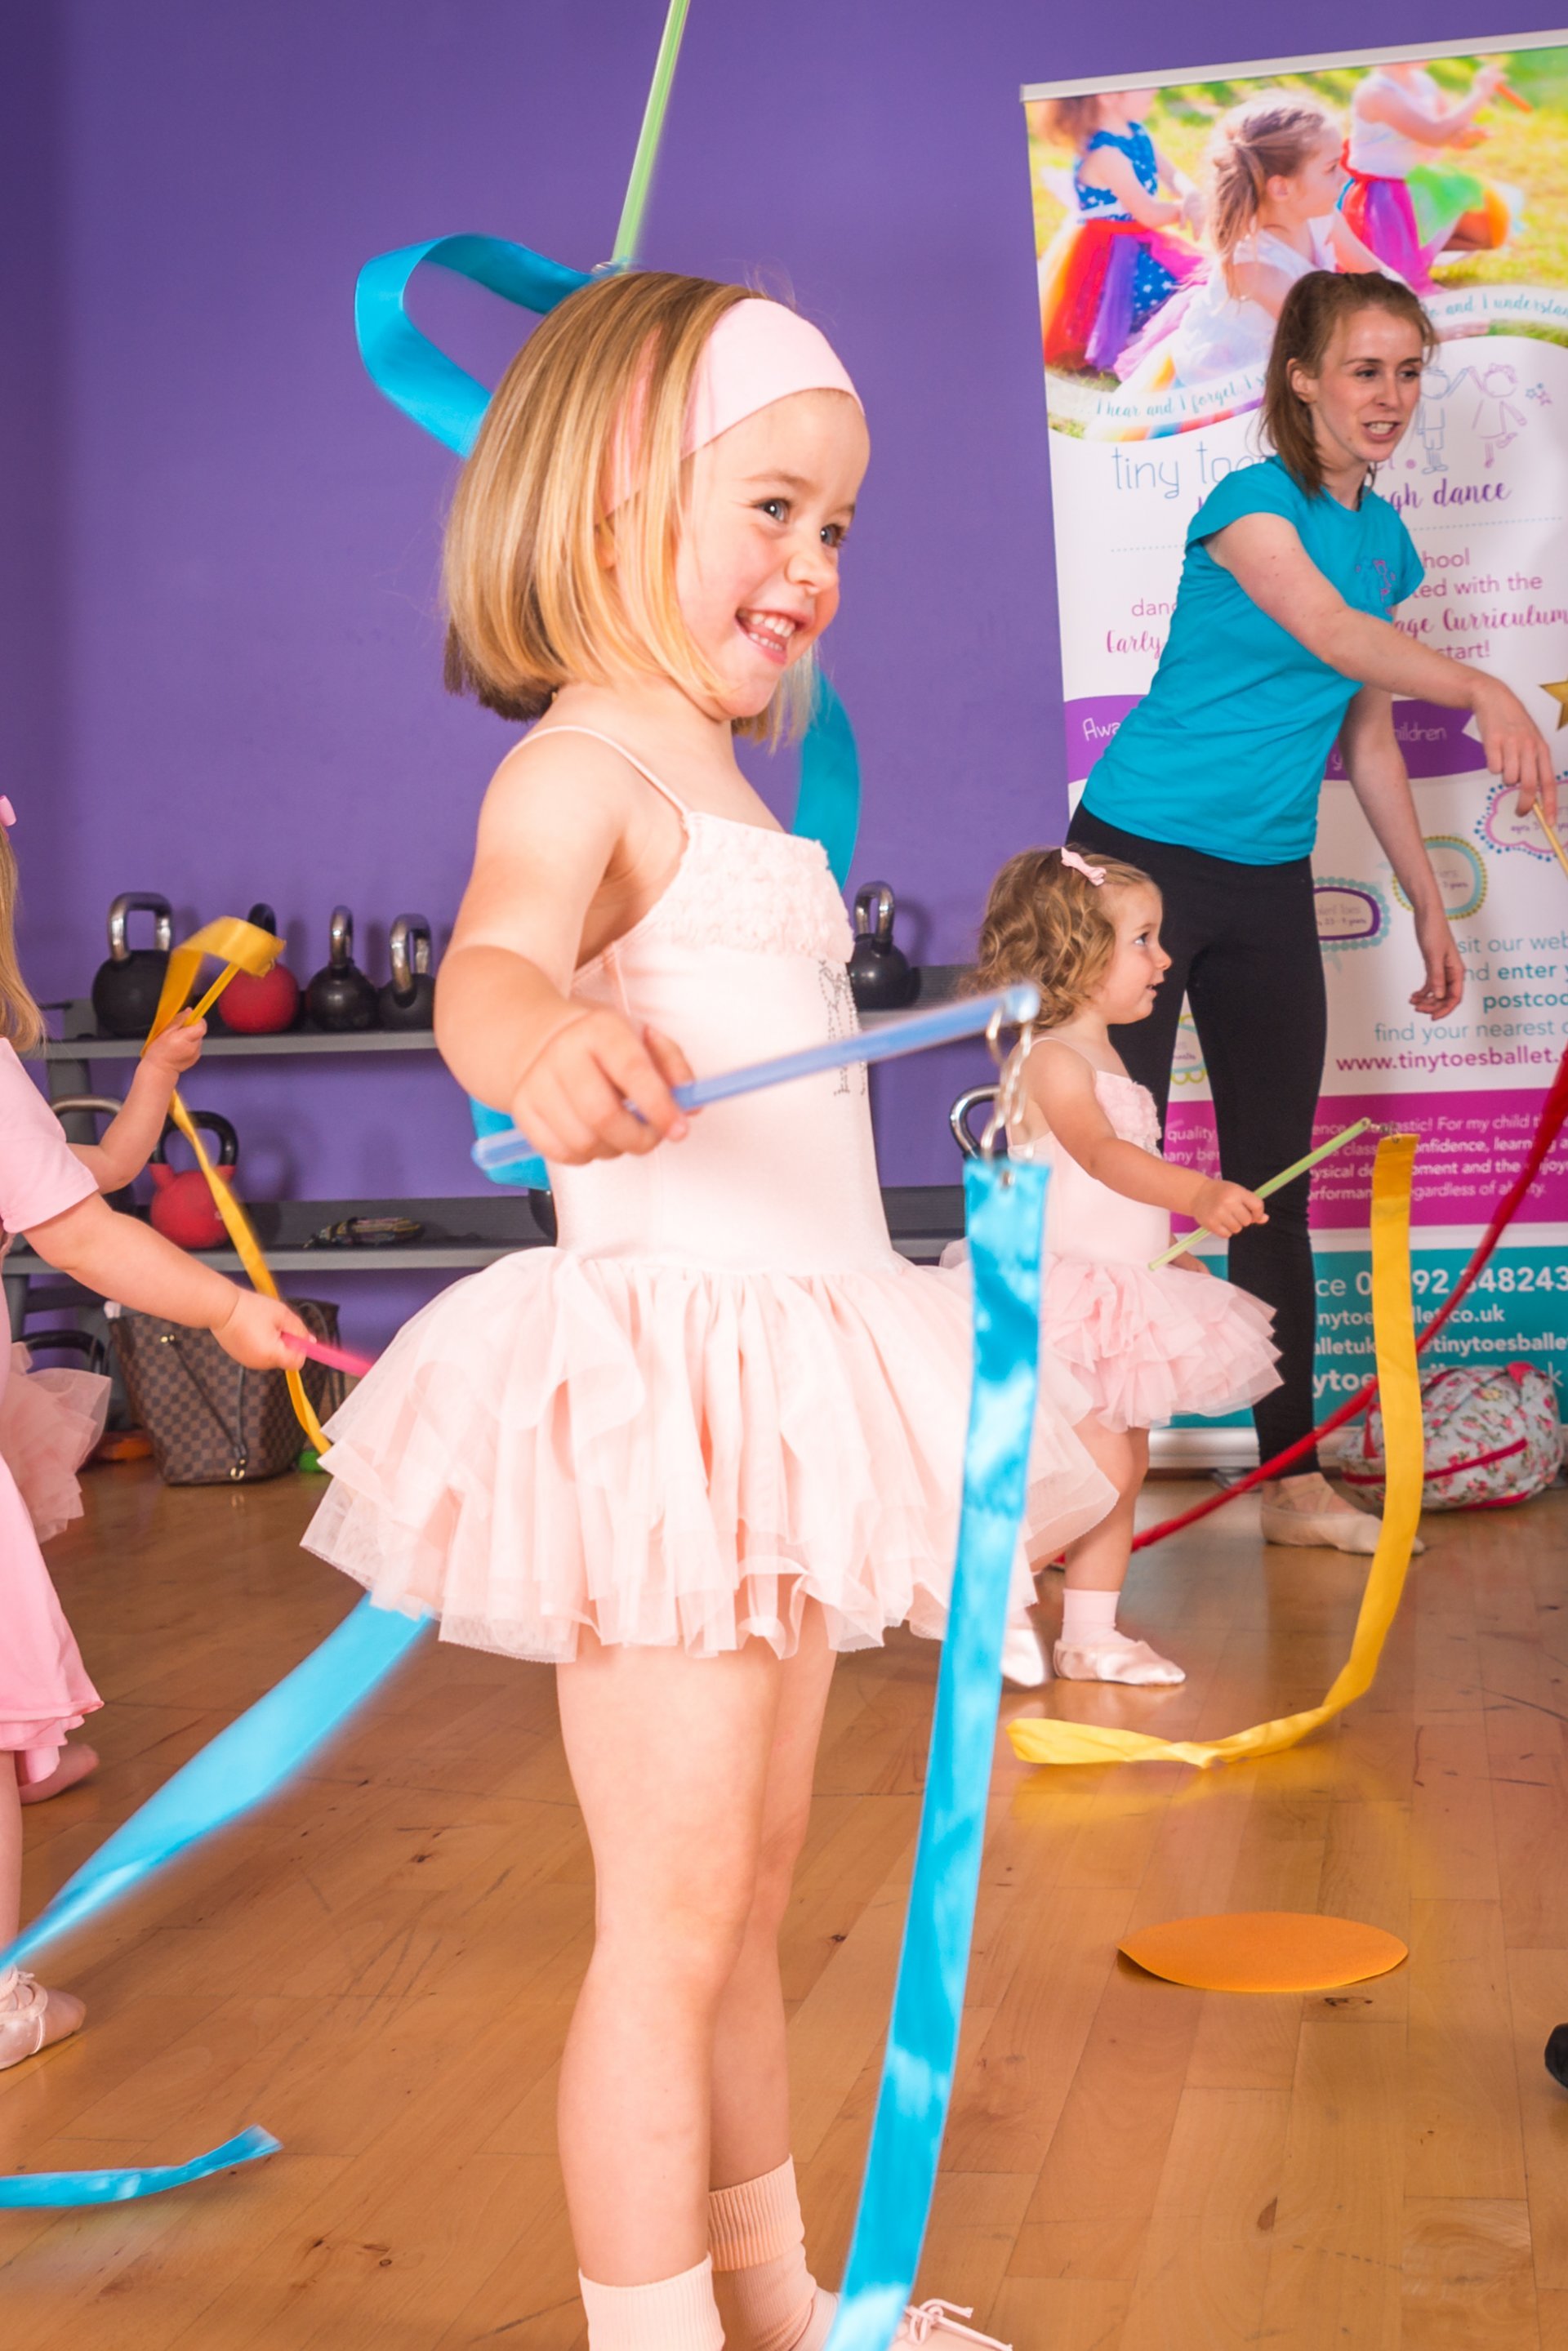 How children learn through dance and play